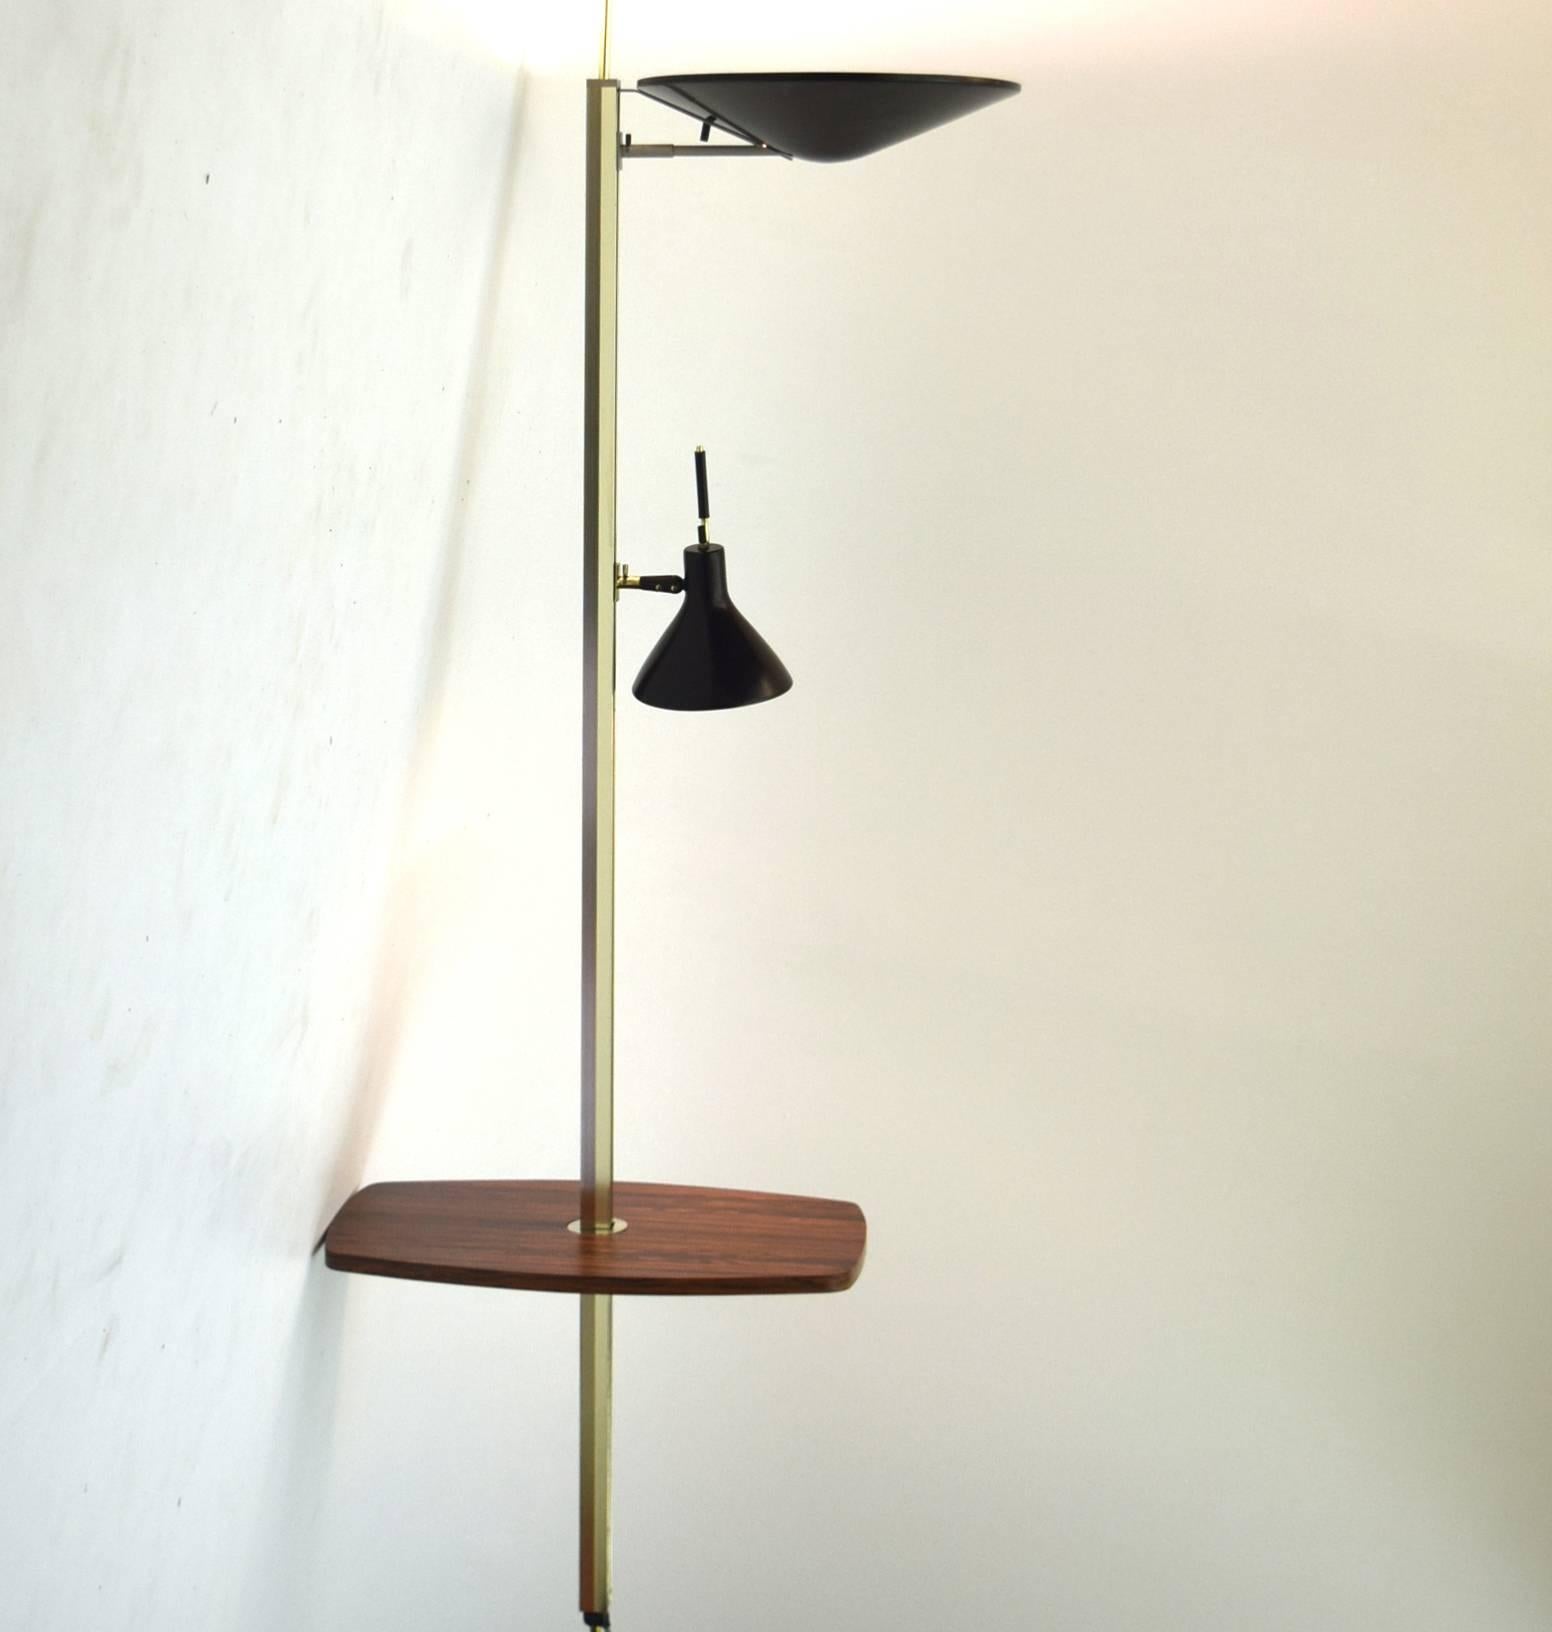 floor to ceiling tension pole lamp